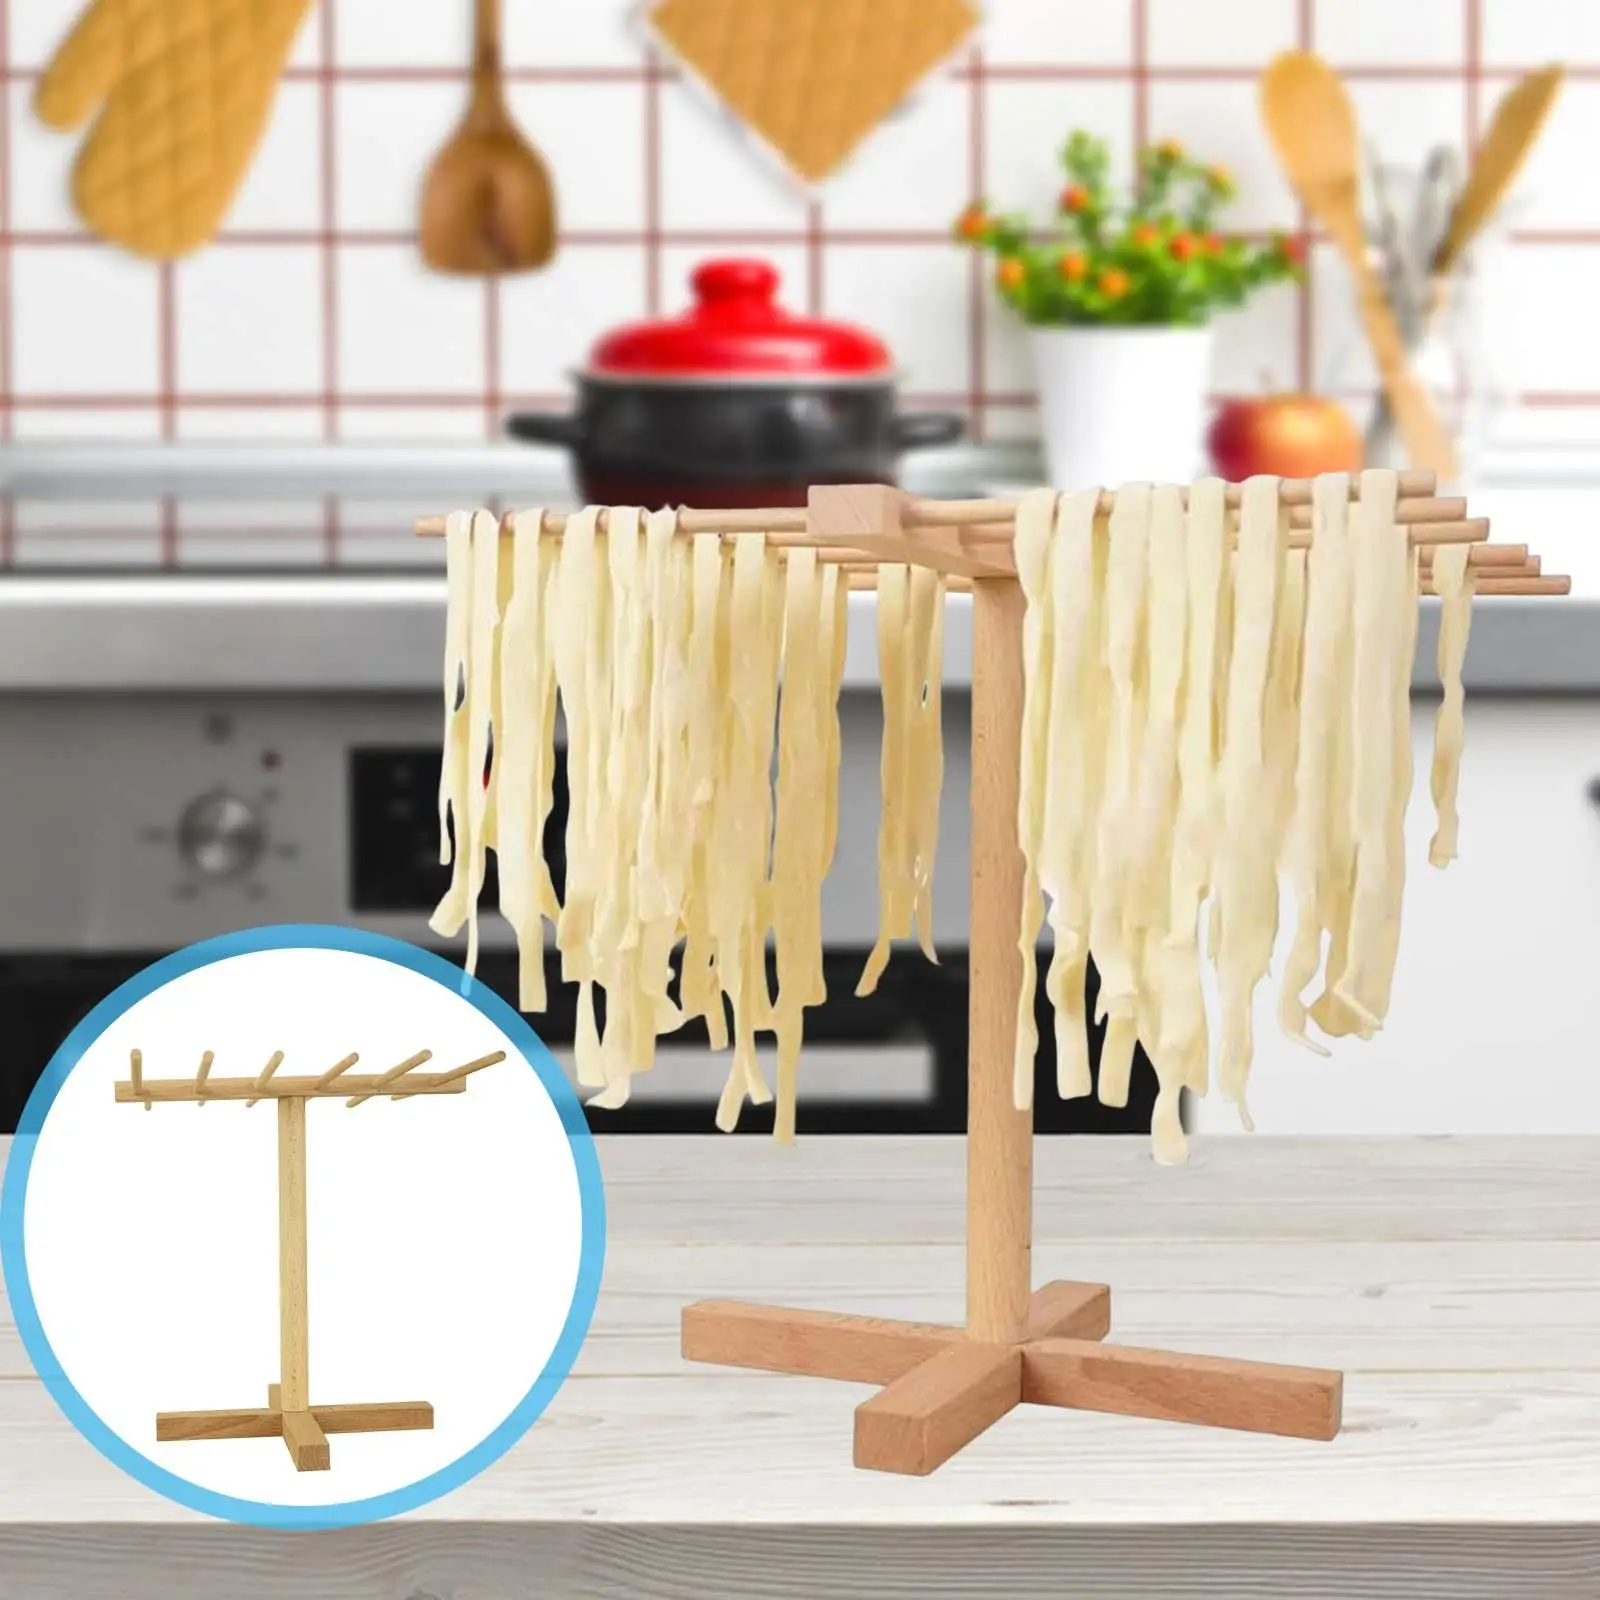 Pasta Drying Rack Hanging Dryer Rack Easy to Transfer Pasta Making Accessories Spaghetti Noodle Dryer for Household Vermicelli